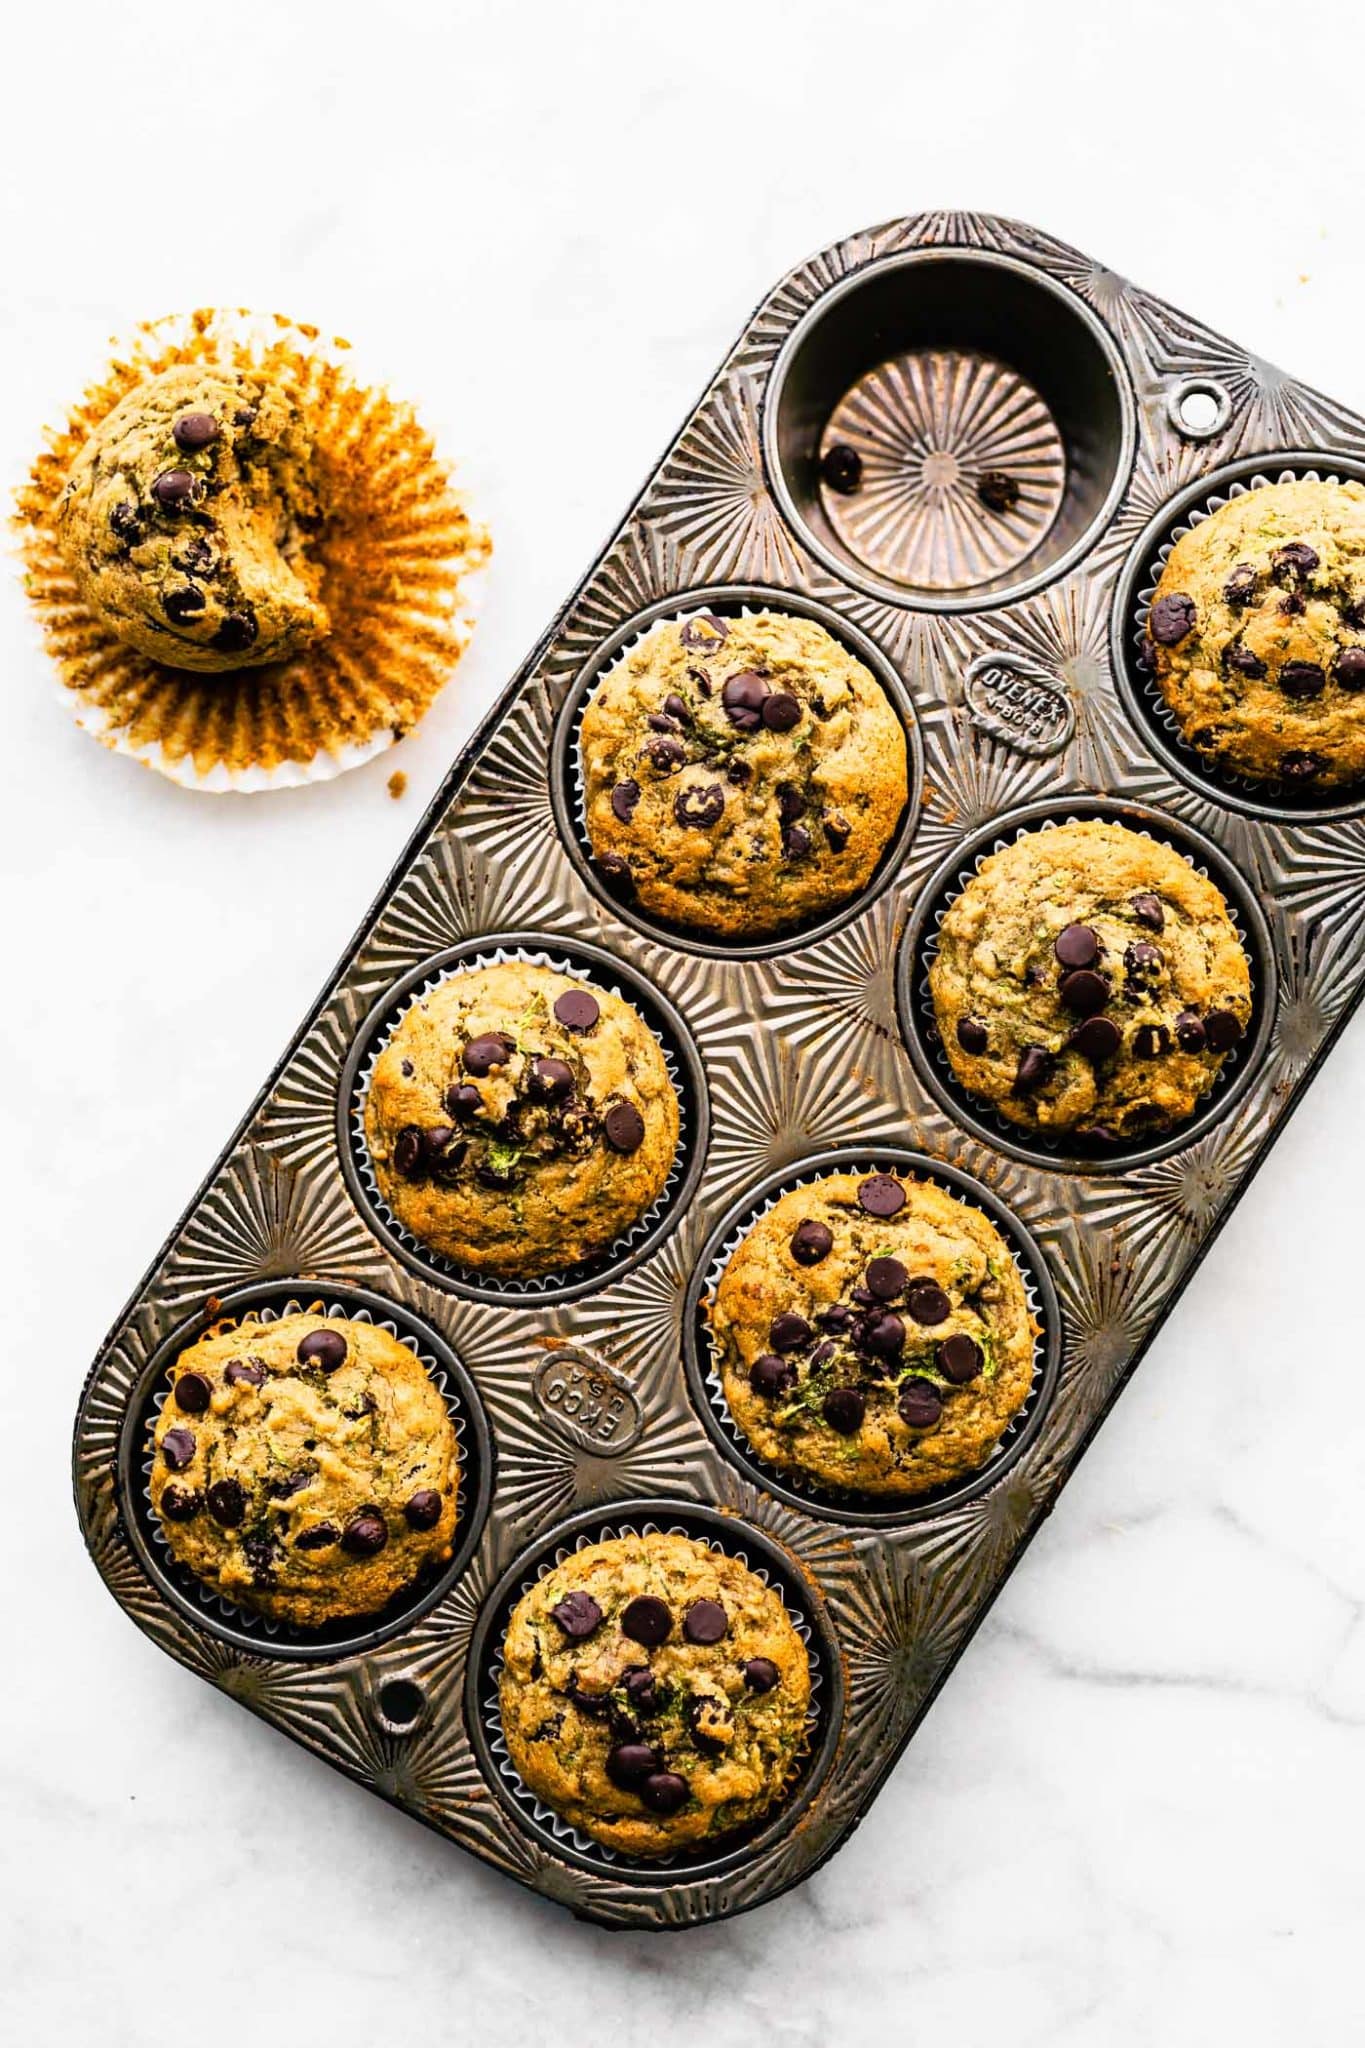 a muffin pan full of 7 baked gluten free zucchini muffins and a single muffin on the side with the liner pulled down and a bite taken out